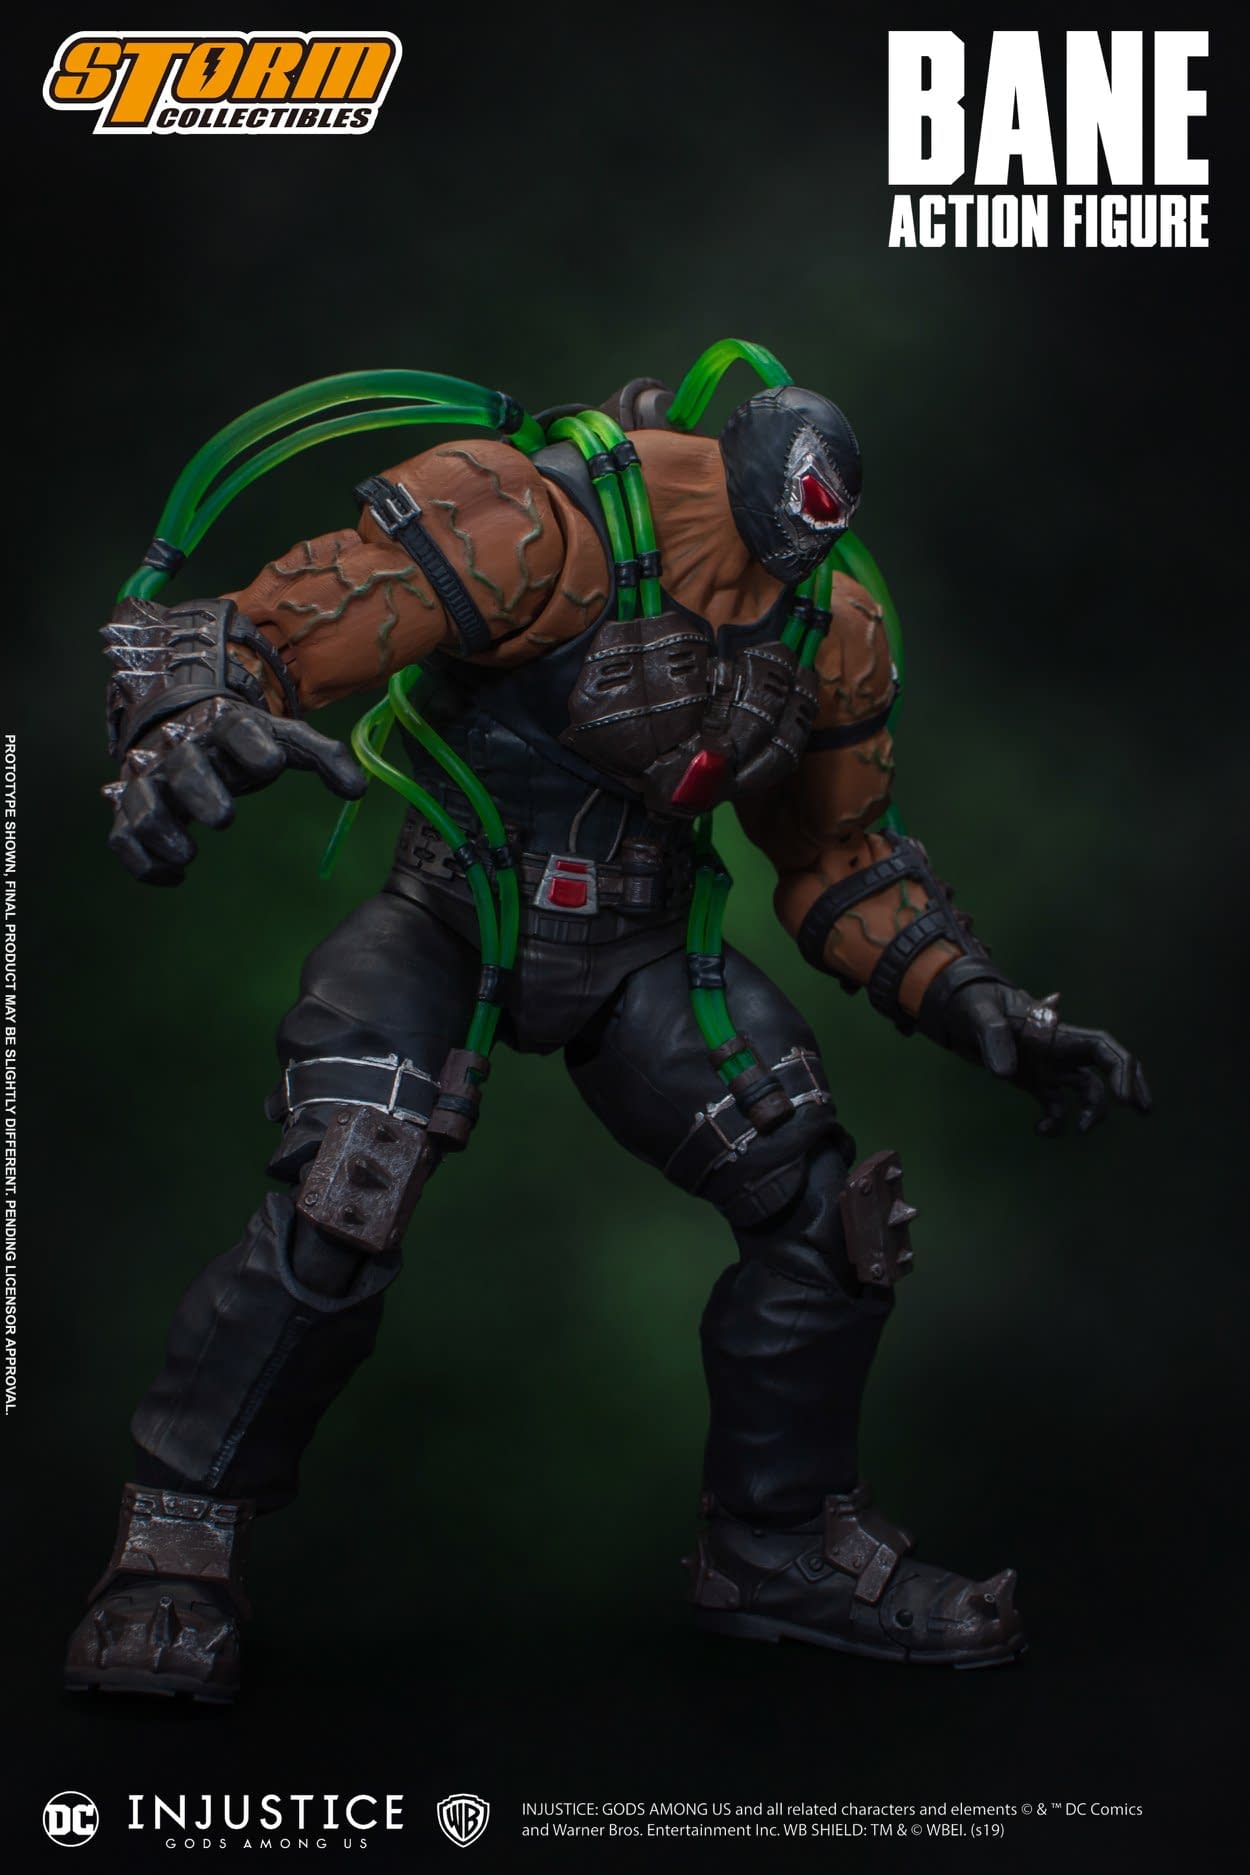 Bane Is Jucied and Ready to Rock with New Storm Collectibles Figure